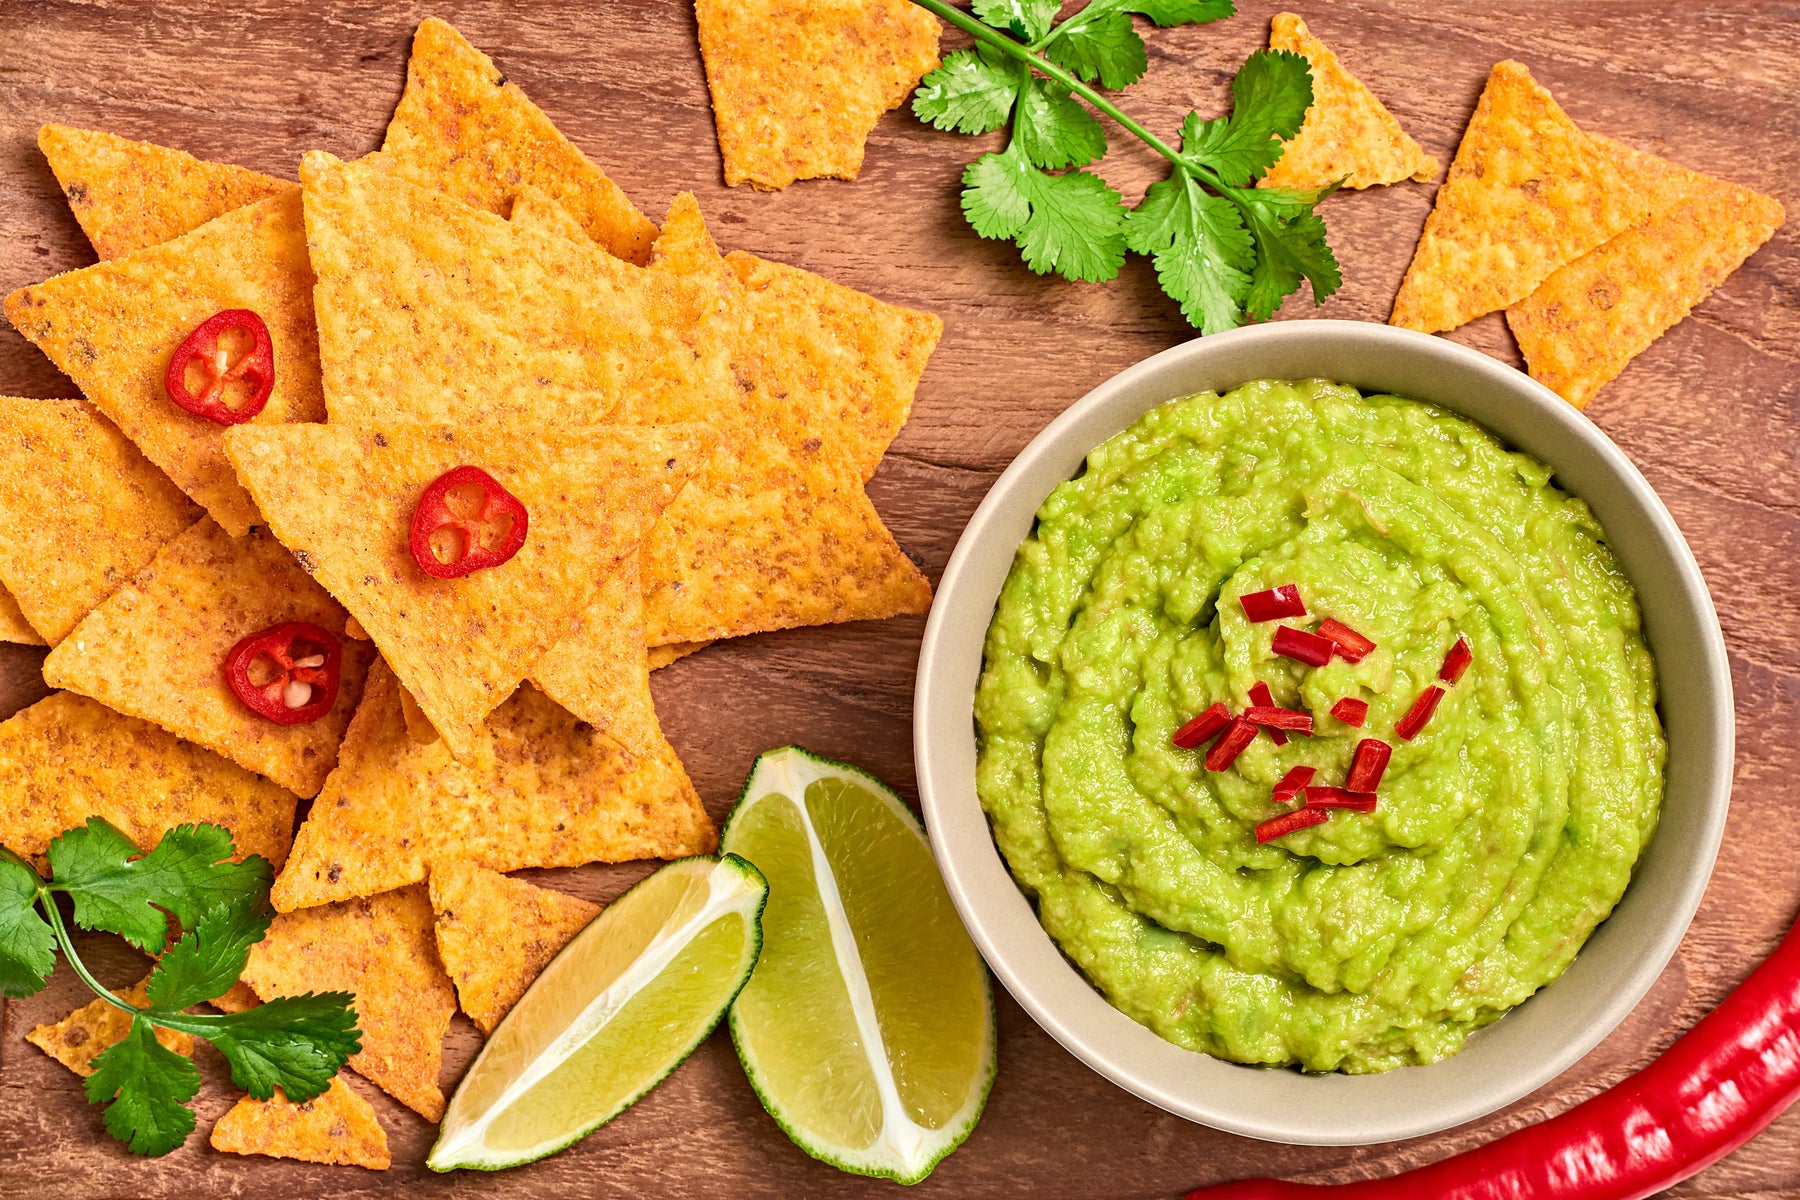 How to Make Fresh and Zesty Guacamole